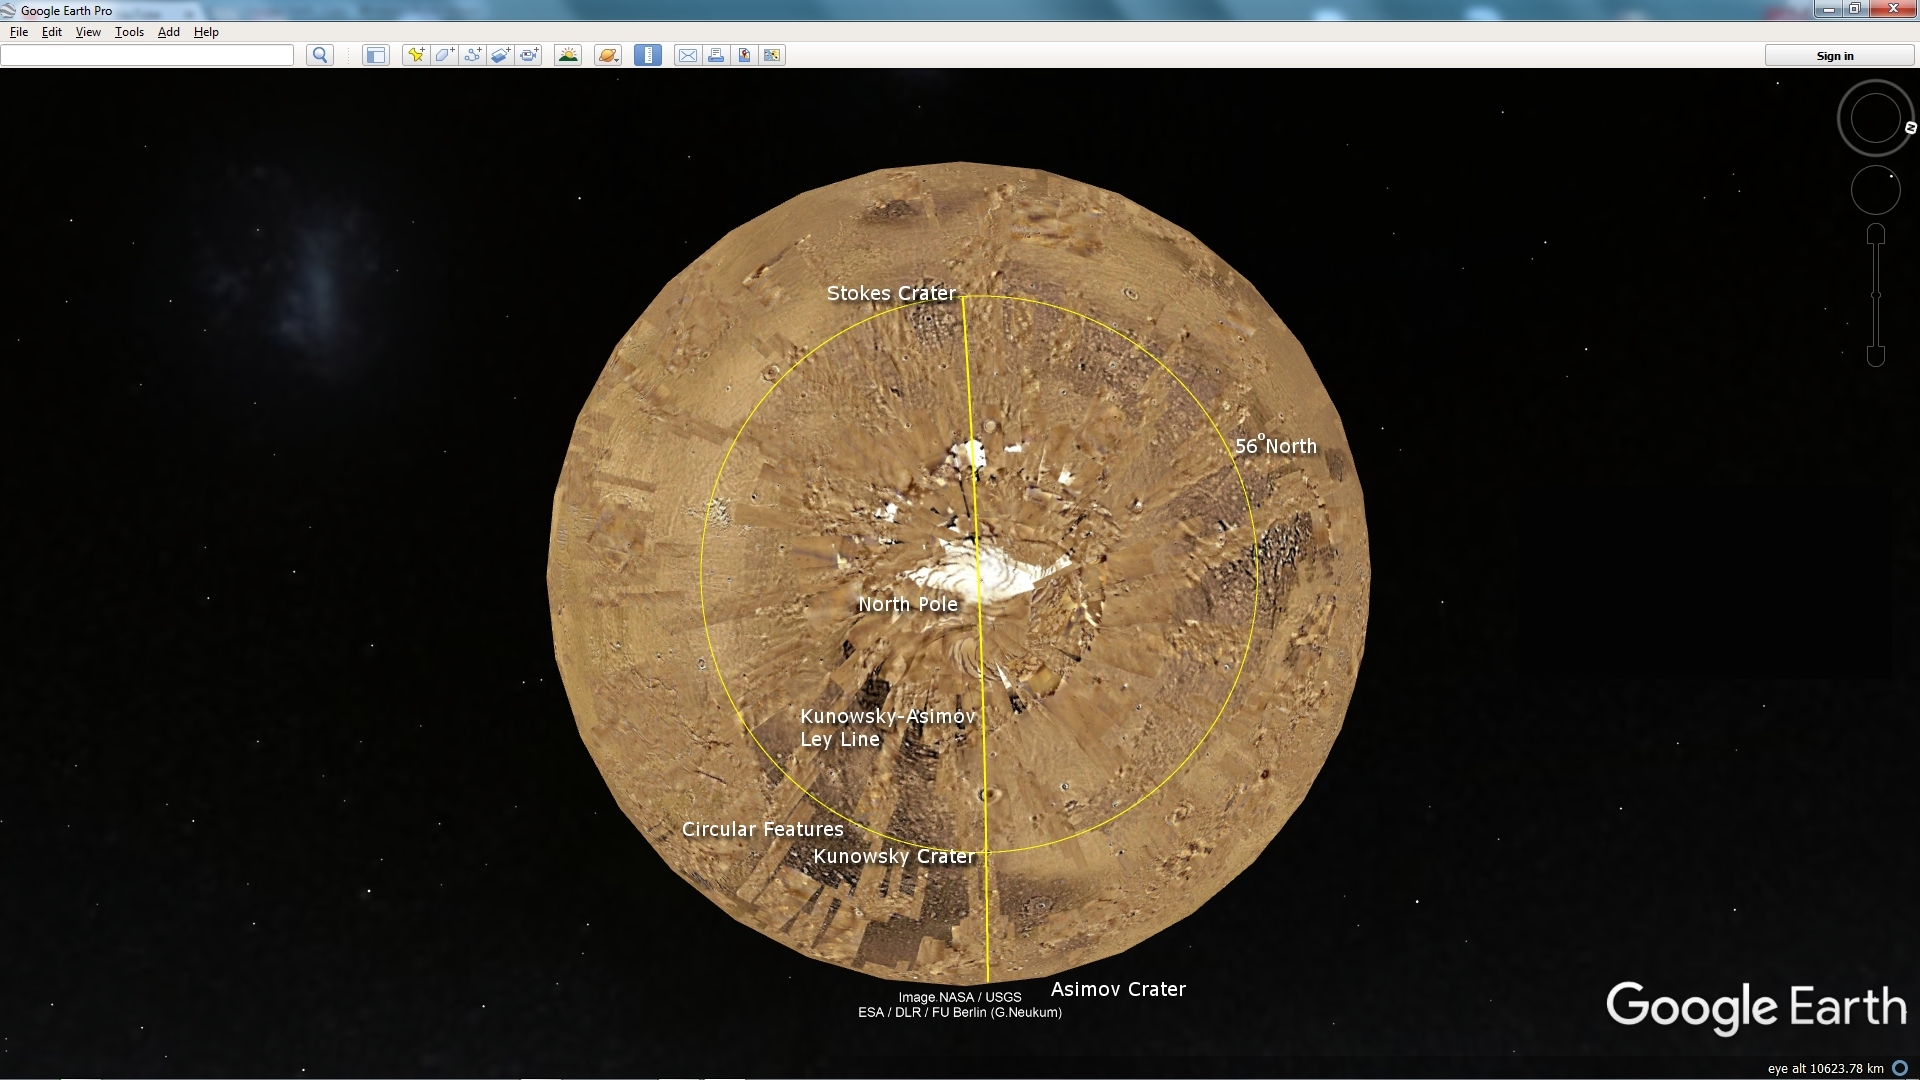 Circular Features at the same Latitude as Kunowsky Crater, namely 56 degrees North